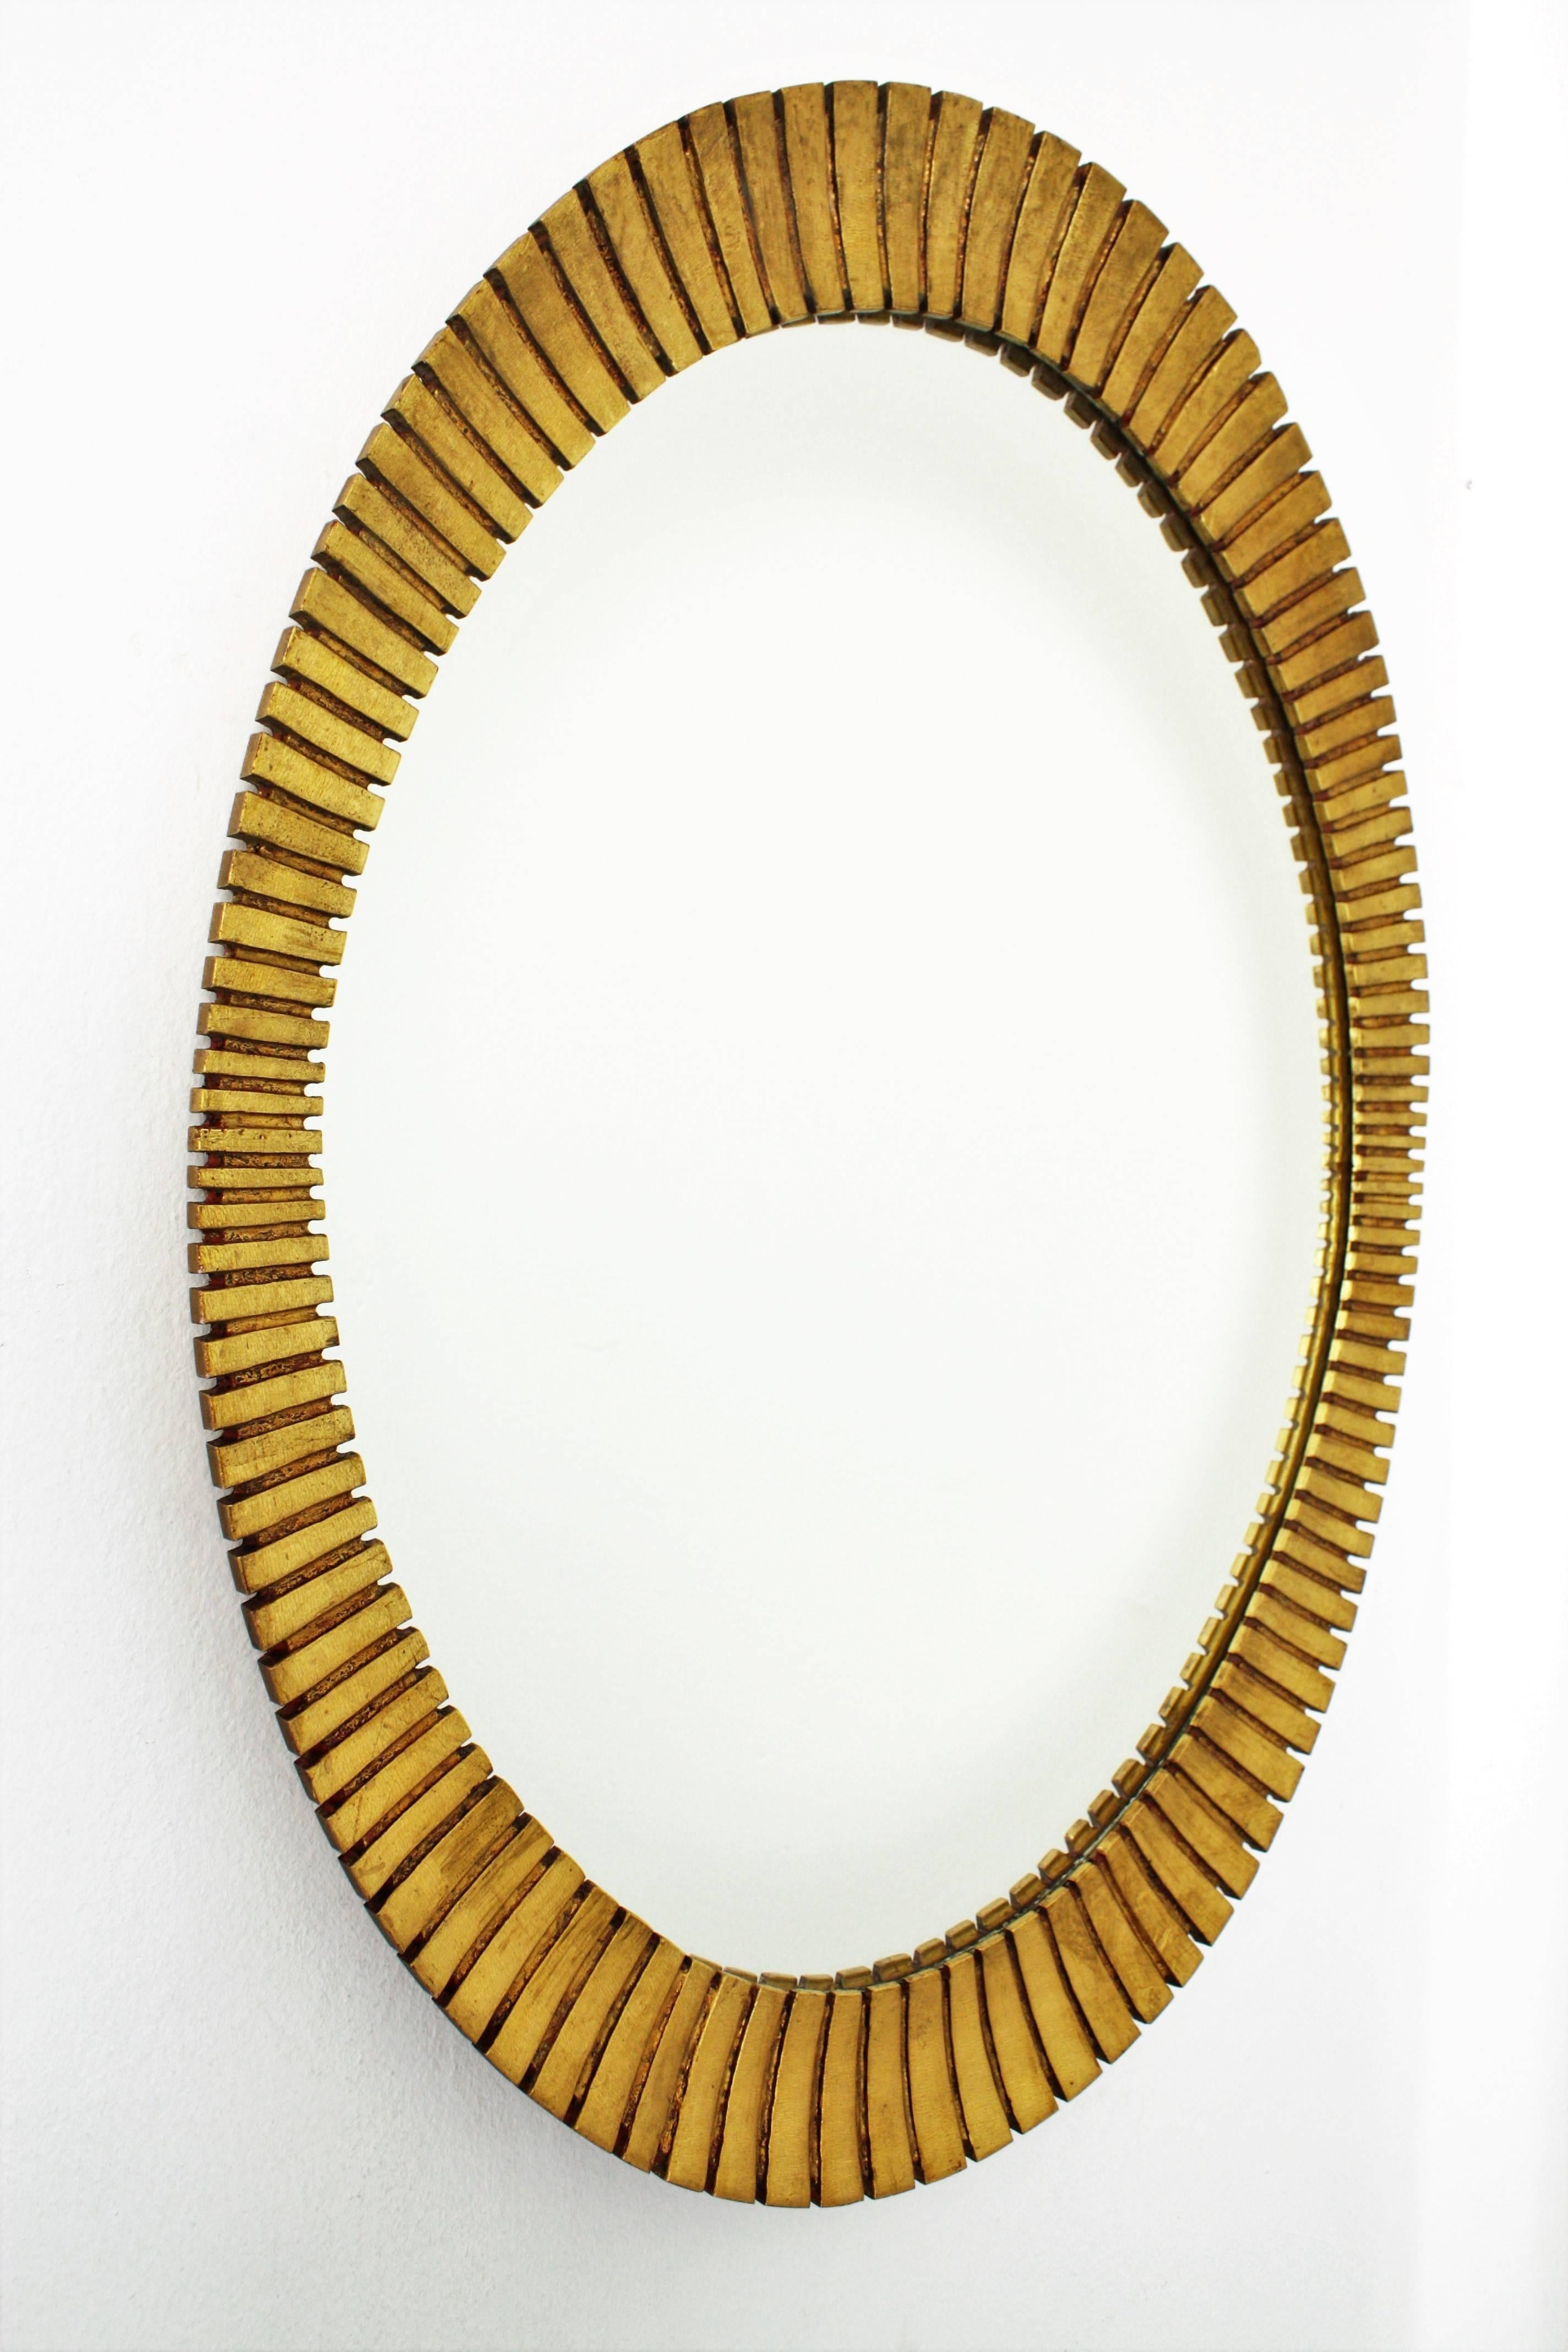 Gorgeous scalloped giltwood oval mirror with gold leaf finish in the Hollywood Regency style manufactured by the Spanish cabinet maker Francisco Hurtado. Ovoid shape frame with finely carved stripes and scalloped edge that make this mirror highly